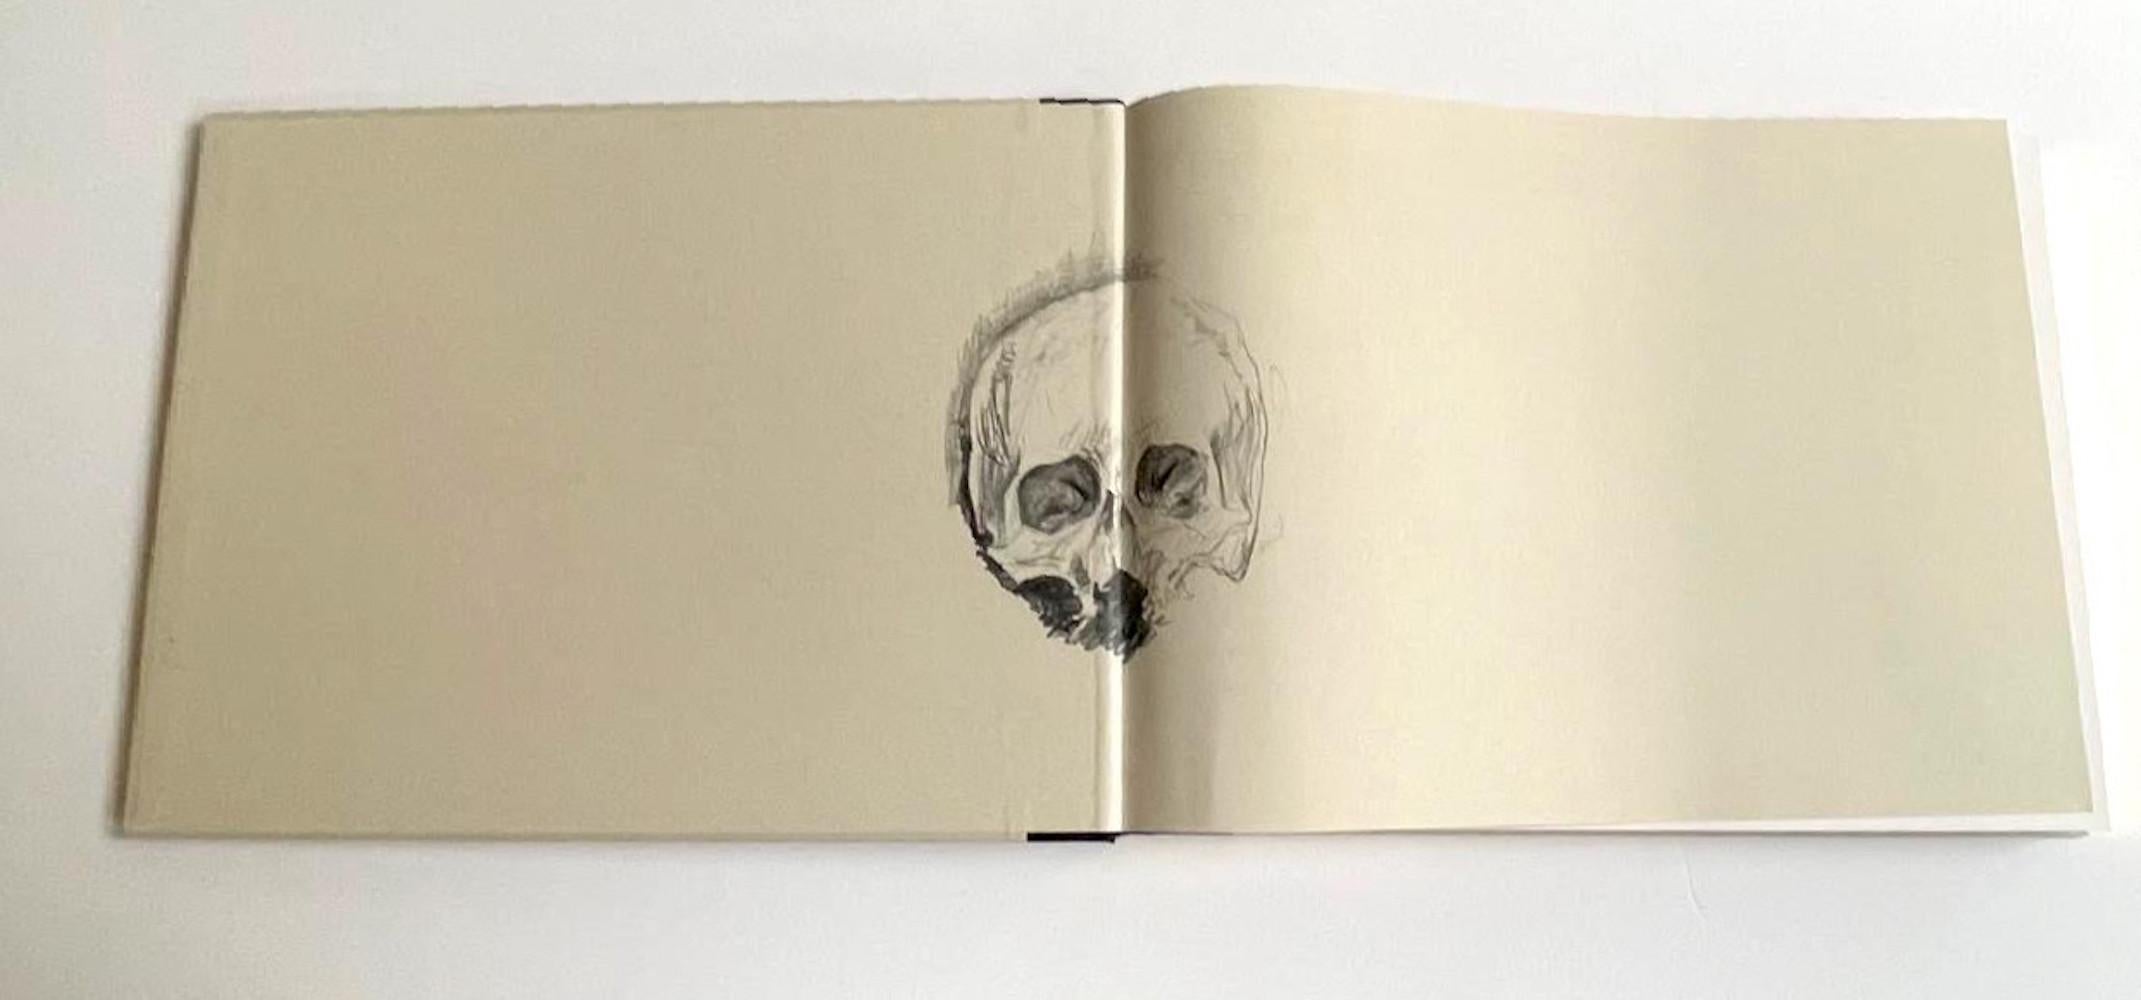 Damien Hirst
From the Cradle to the Grave, 2005
Limited Edition hardback monograph (Hand signed and numbered)
Hand signed and numbered 998/1500 by Damien Hirst on the title page
16 × 12 1/2 × 2 1/4 inches

Publisher's blurb:
From the Cradle to the